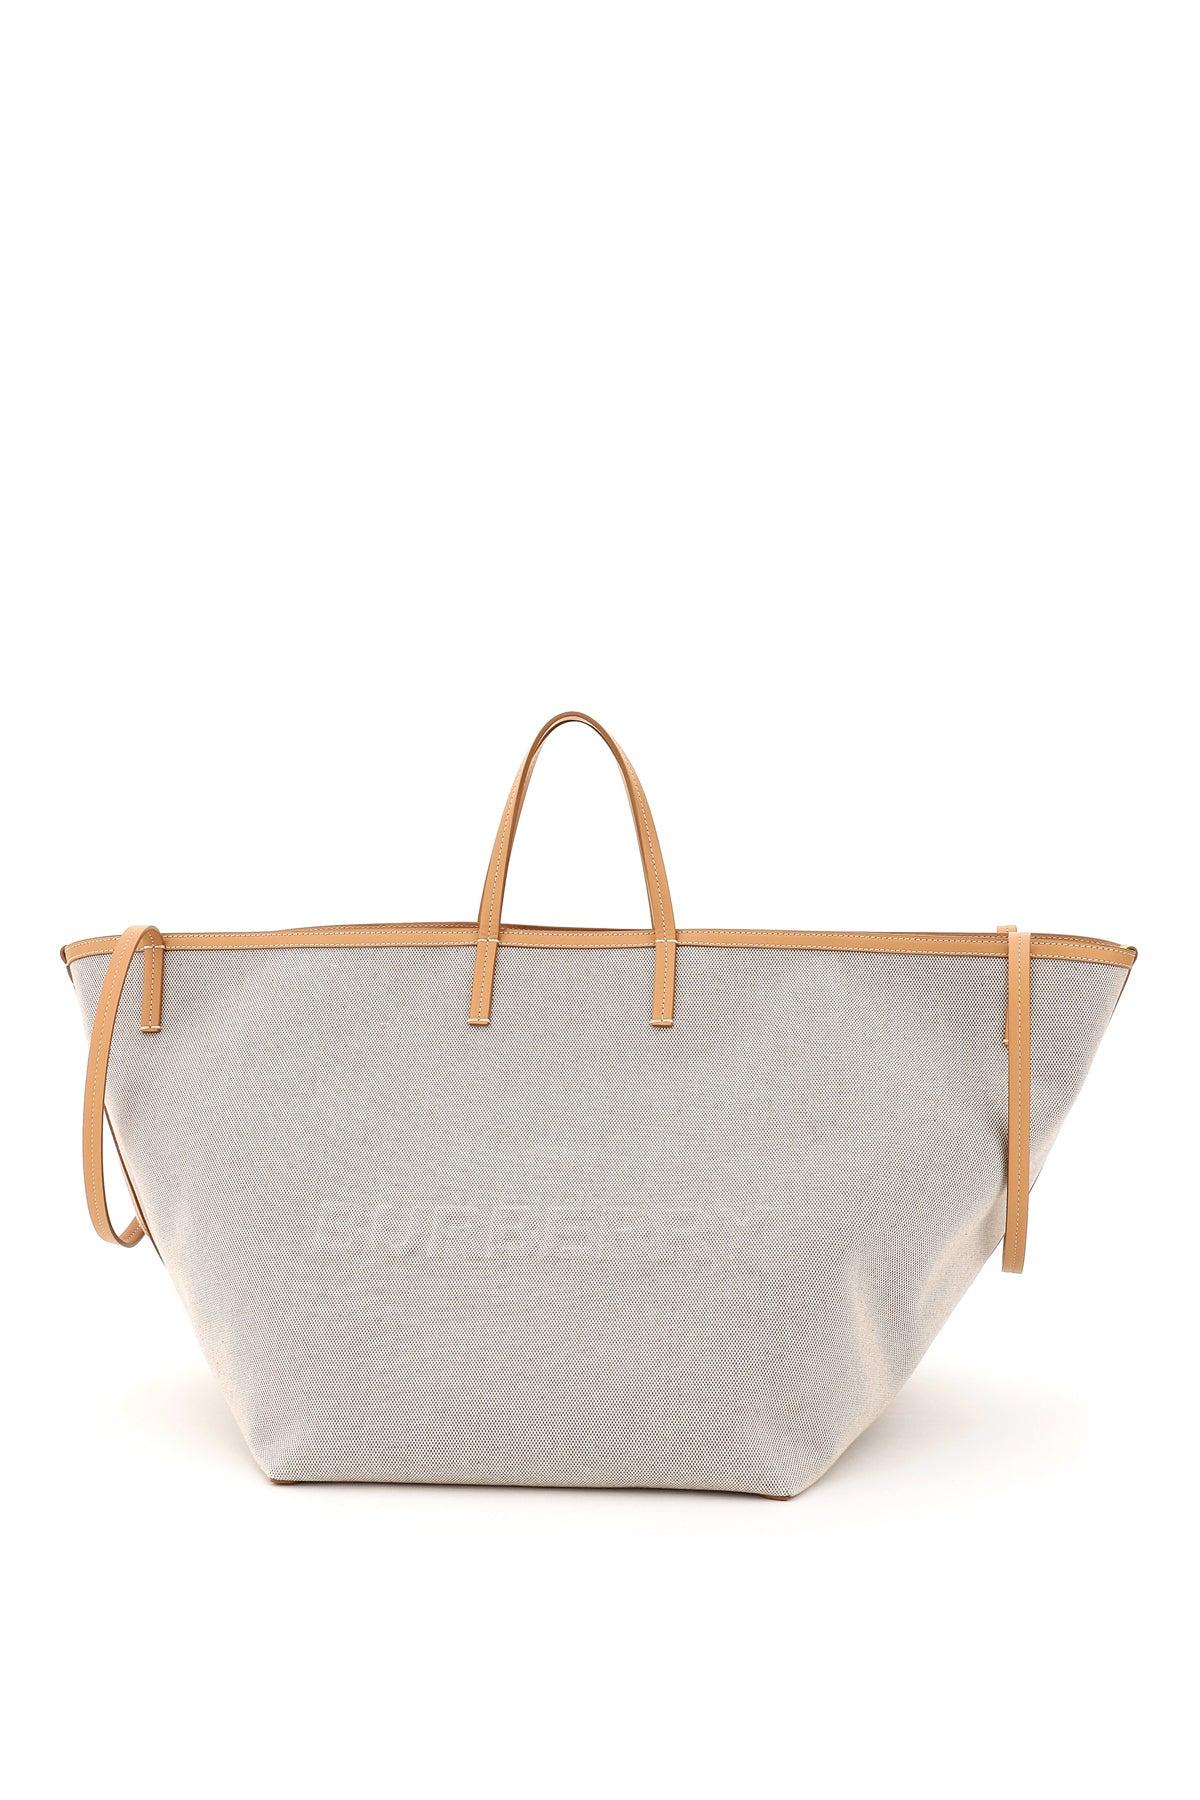 Burberry Embossed Logo Extra Large Beach Tote Bag in Natural | Lyst